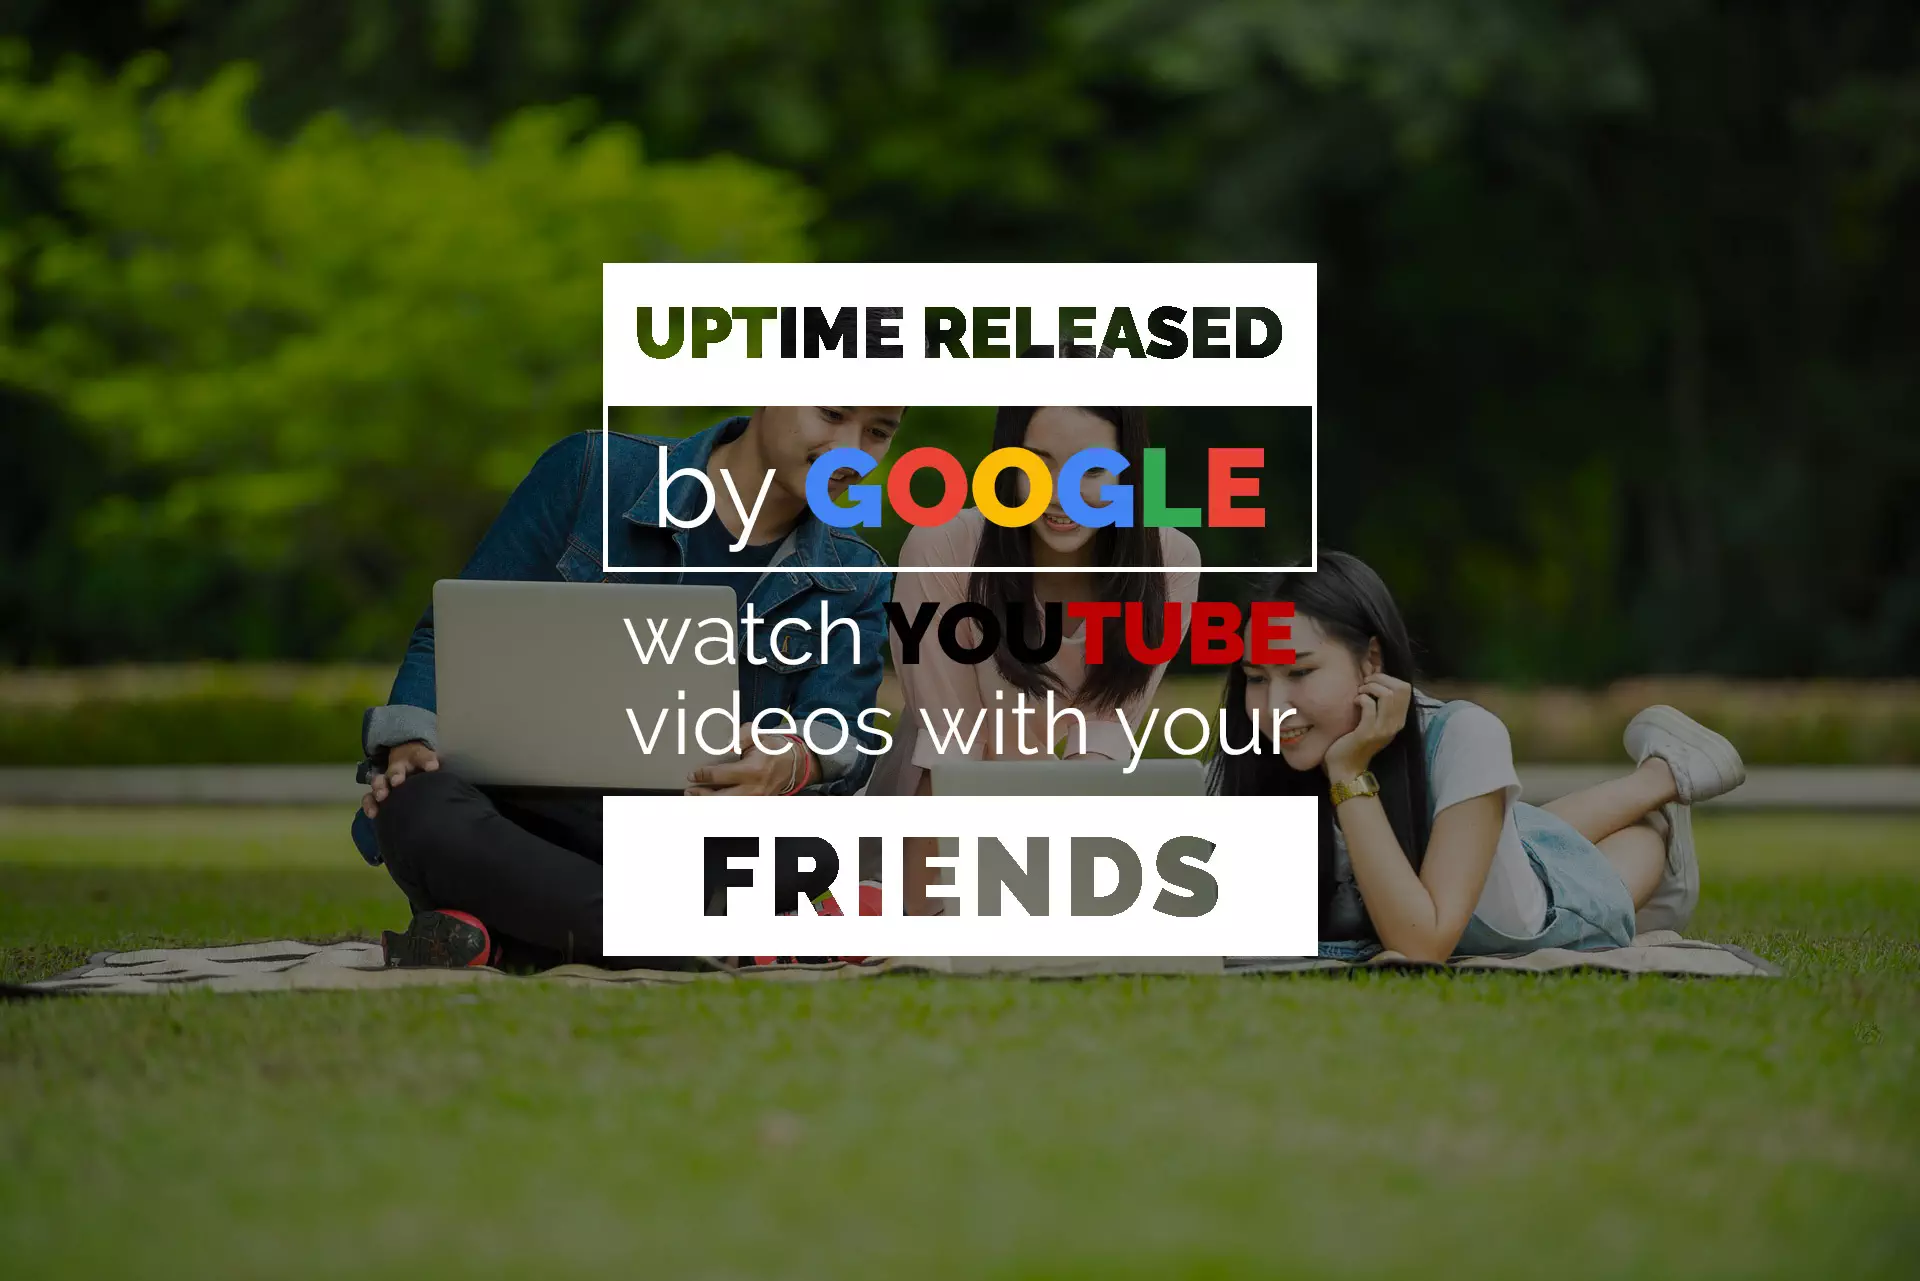 uptime-released-by-google-watch-youtube-videos-with-your-friends